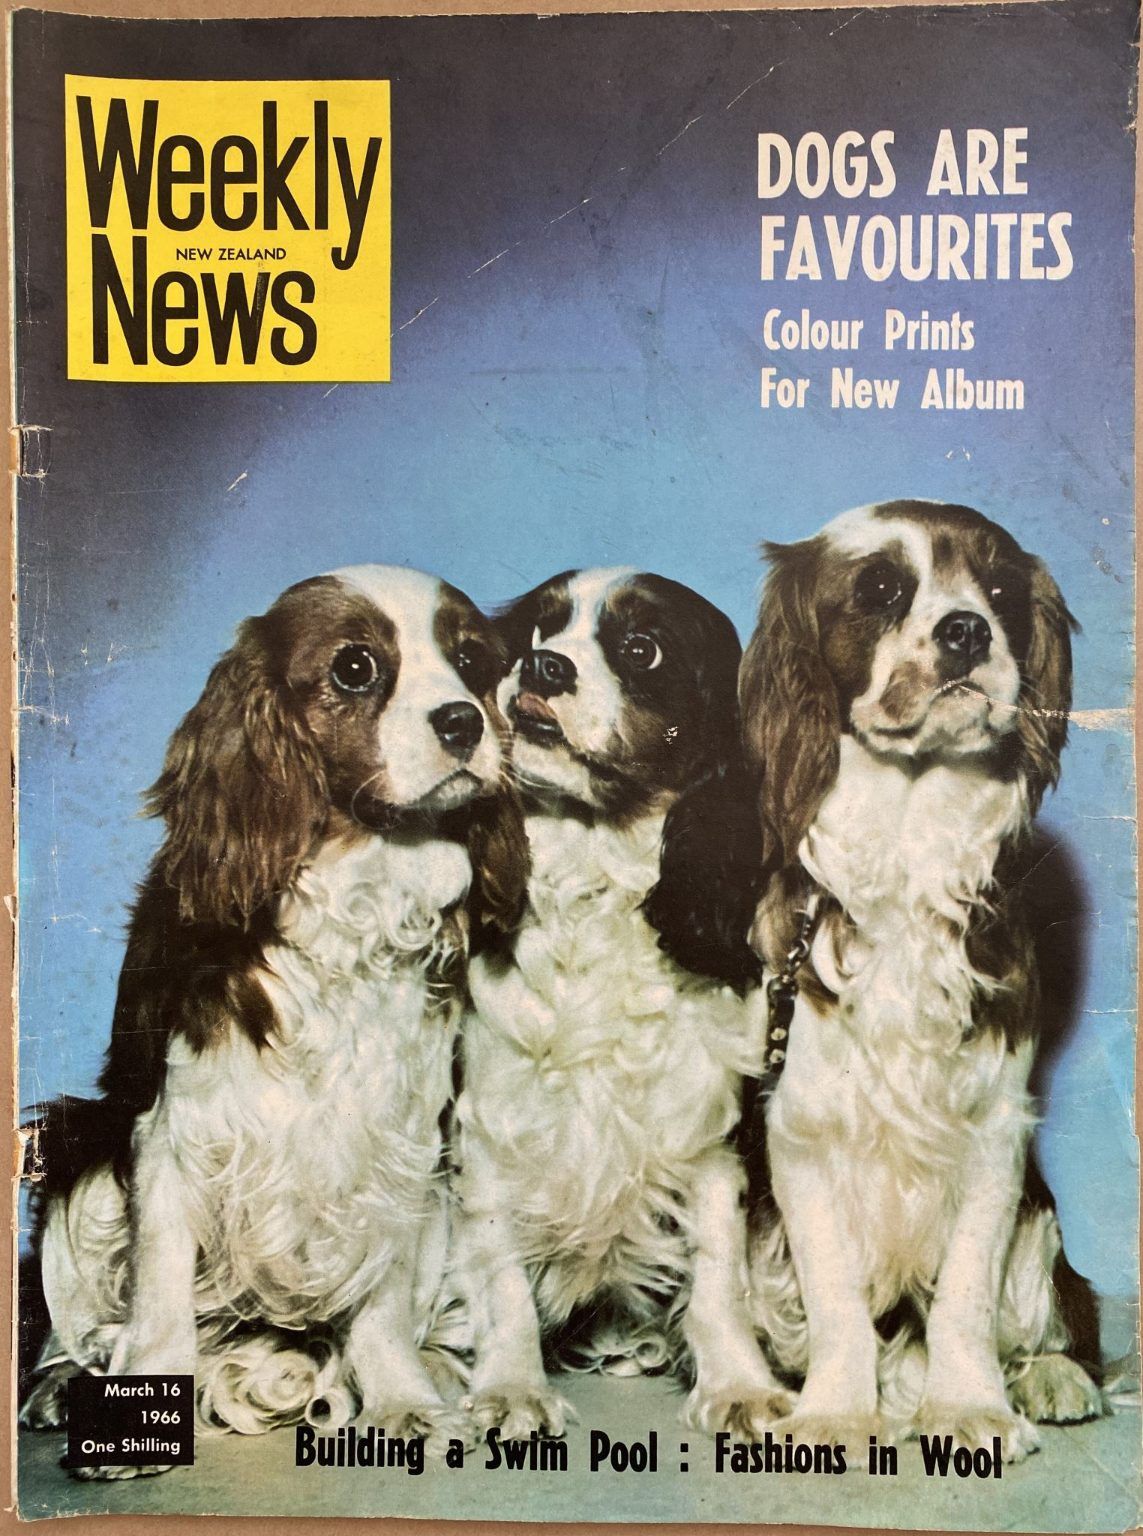 OLD NEWSPAPER: New Zealand Weekly News, No. 5338, 16 March 1966